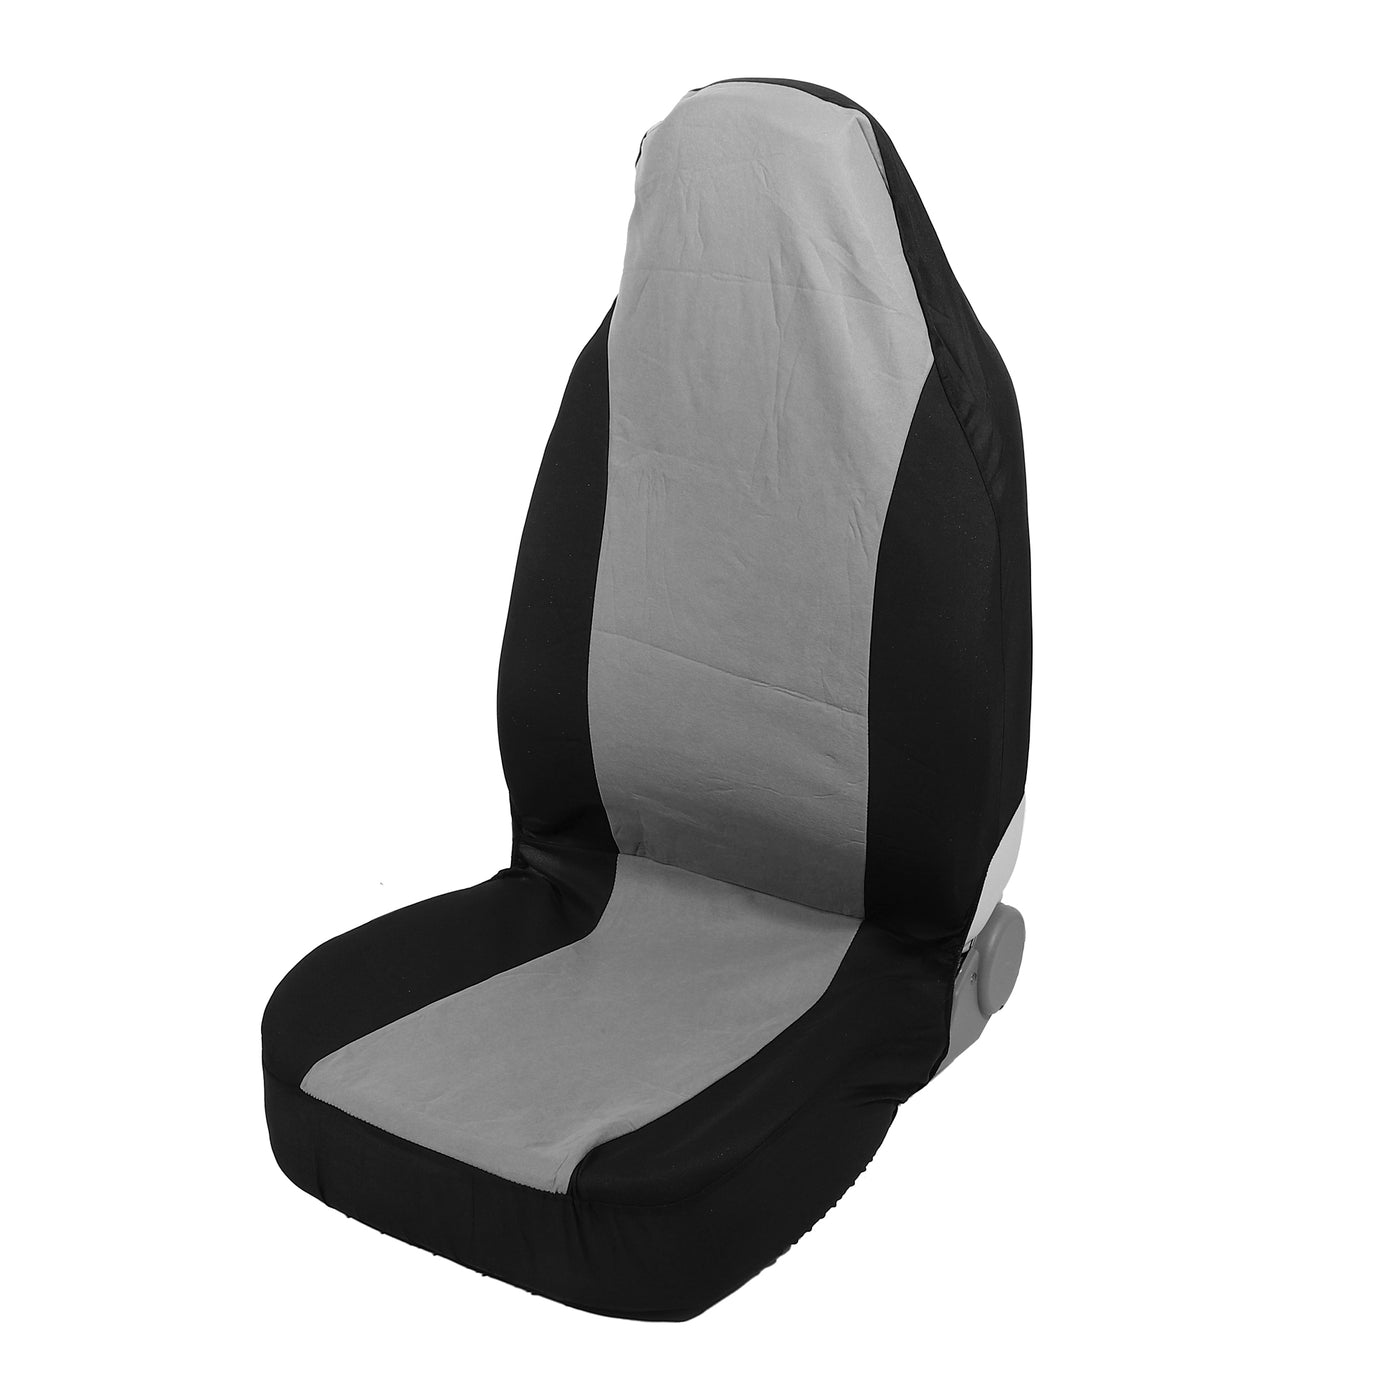 X AUTOHAUX Universal Front Car Seat Cover Set Flat Cloth Fabric Seat Protector Pad for Most Car Truck SUV Black Gray